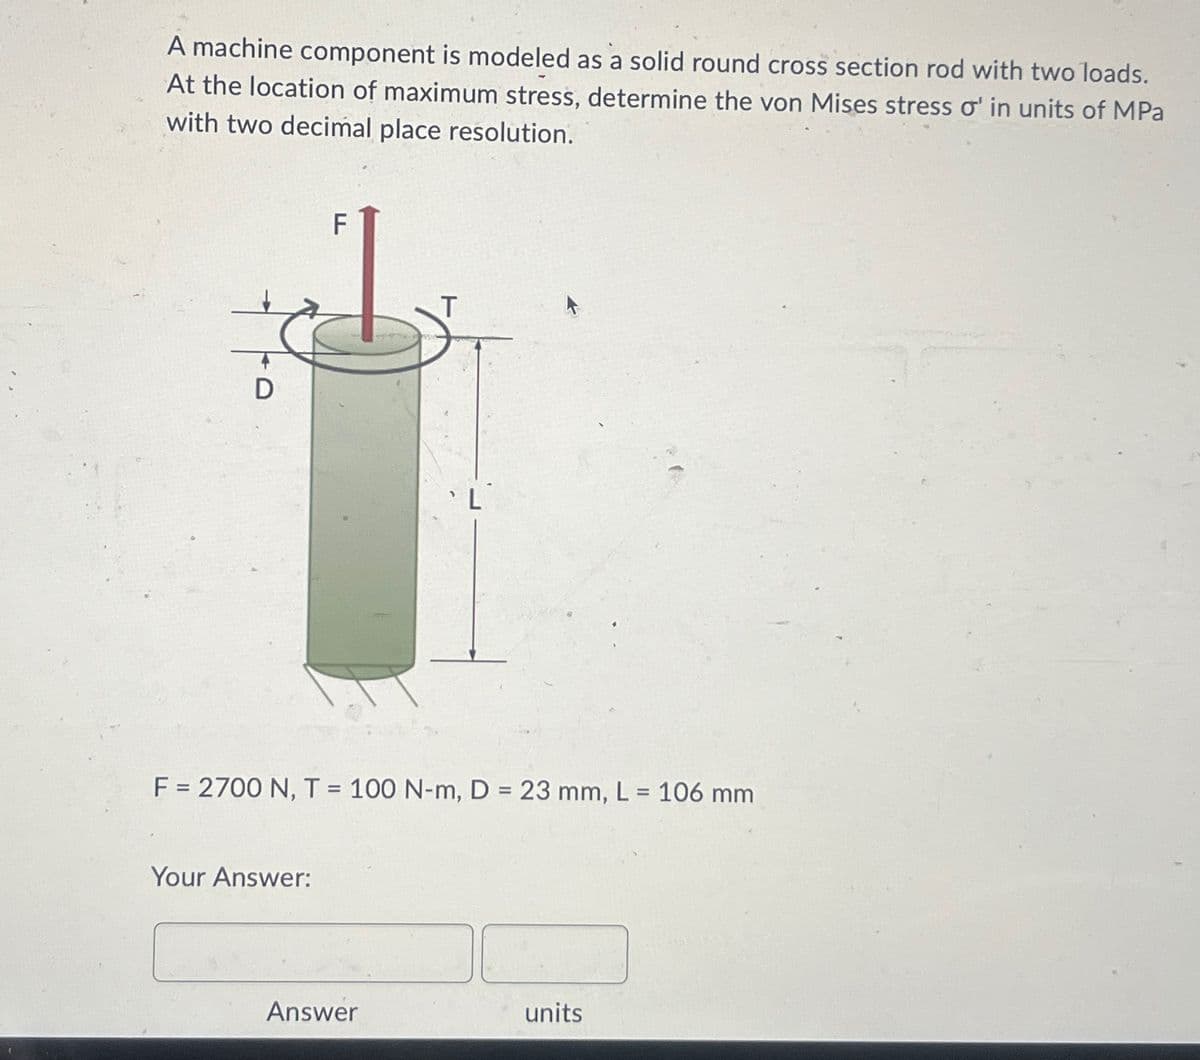 A machine component is modeled as a solid round cross section rod with two loads.
At the location of maximum stress, determine the von Mises stress o' in units of MPa
with two decimal place resolution.
D
F
T
L
F = 2700 N, T = 100 N-m, D = 23 mm, L = 106 mm
Your Answer:
Answer
units